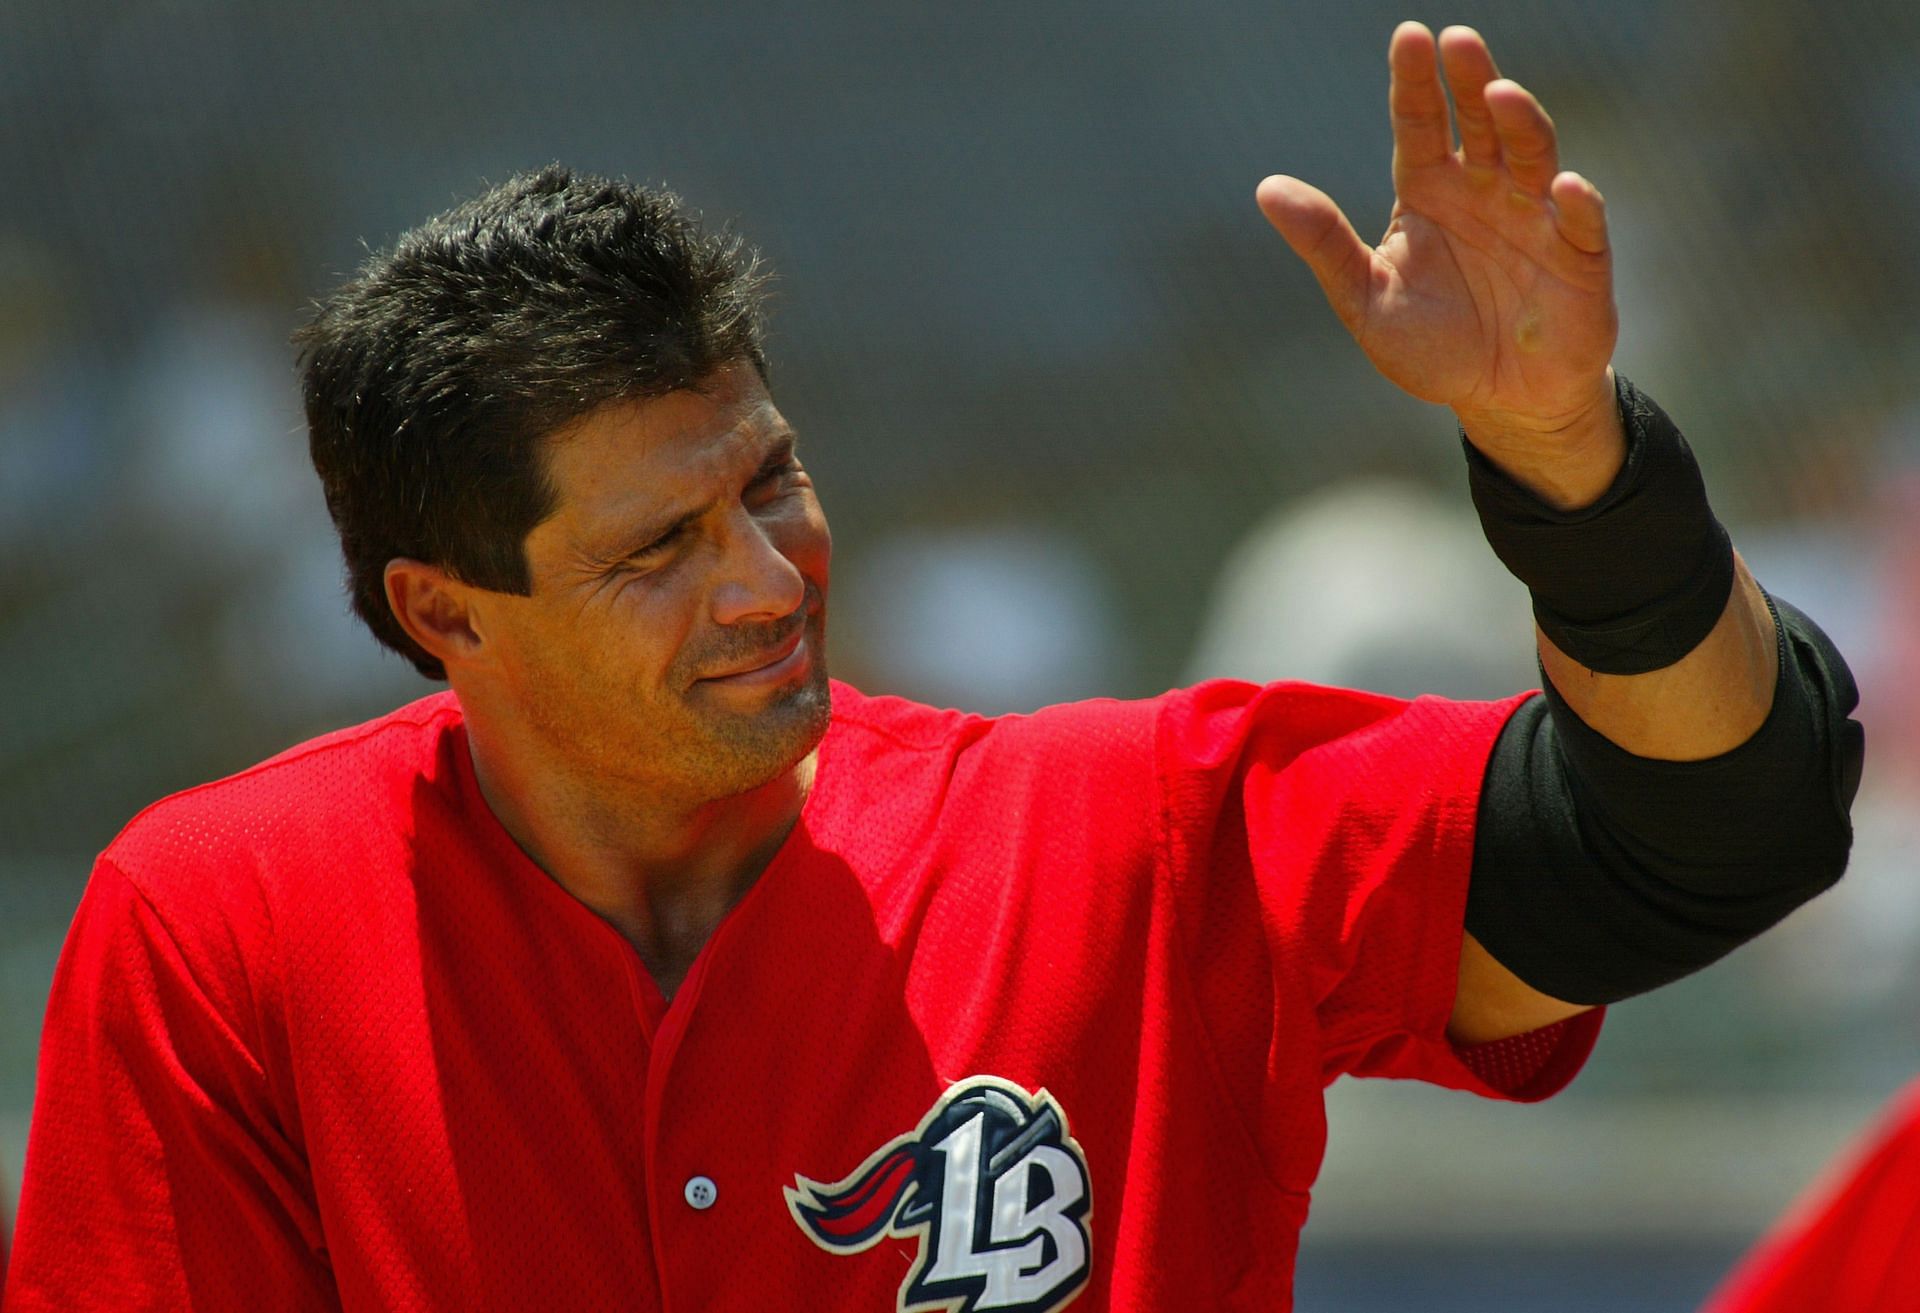 Jose Canseco plays in Golden Baseball League